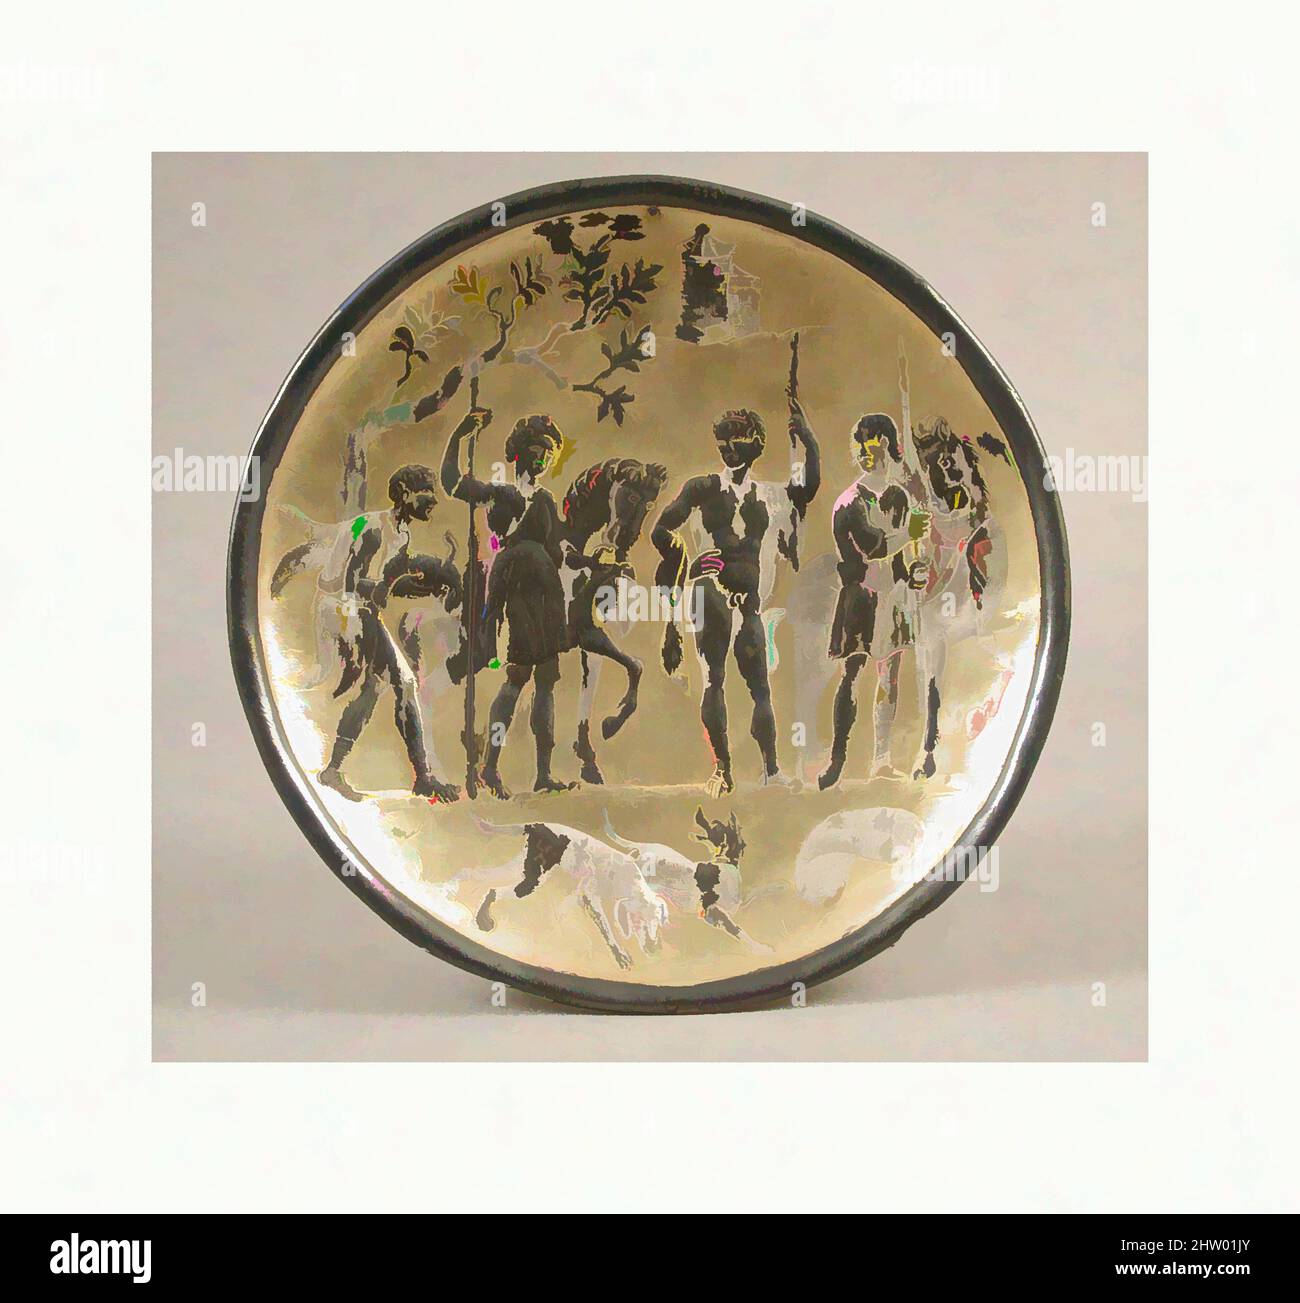 Art inspired by Plate, 19th century, Byzantine, Silver plate, Overall: 11 x 1 1/8 in. (27.9 x 2.9 cm), Reproductions-Metalwork, Classic works modernized by Artotop with a splash of modernity. Shapes, color and value, eye-catching visual impact on art. Emotions through freedom of artworks in a contemporary way. A timeless message pursuing a wildly creative new direction. Artists turning to the digital medium and creating the Artotop NFT Stock Photo